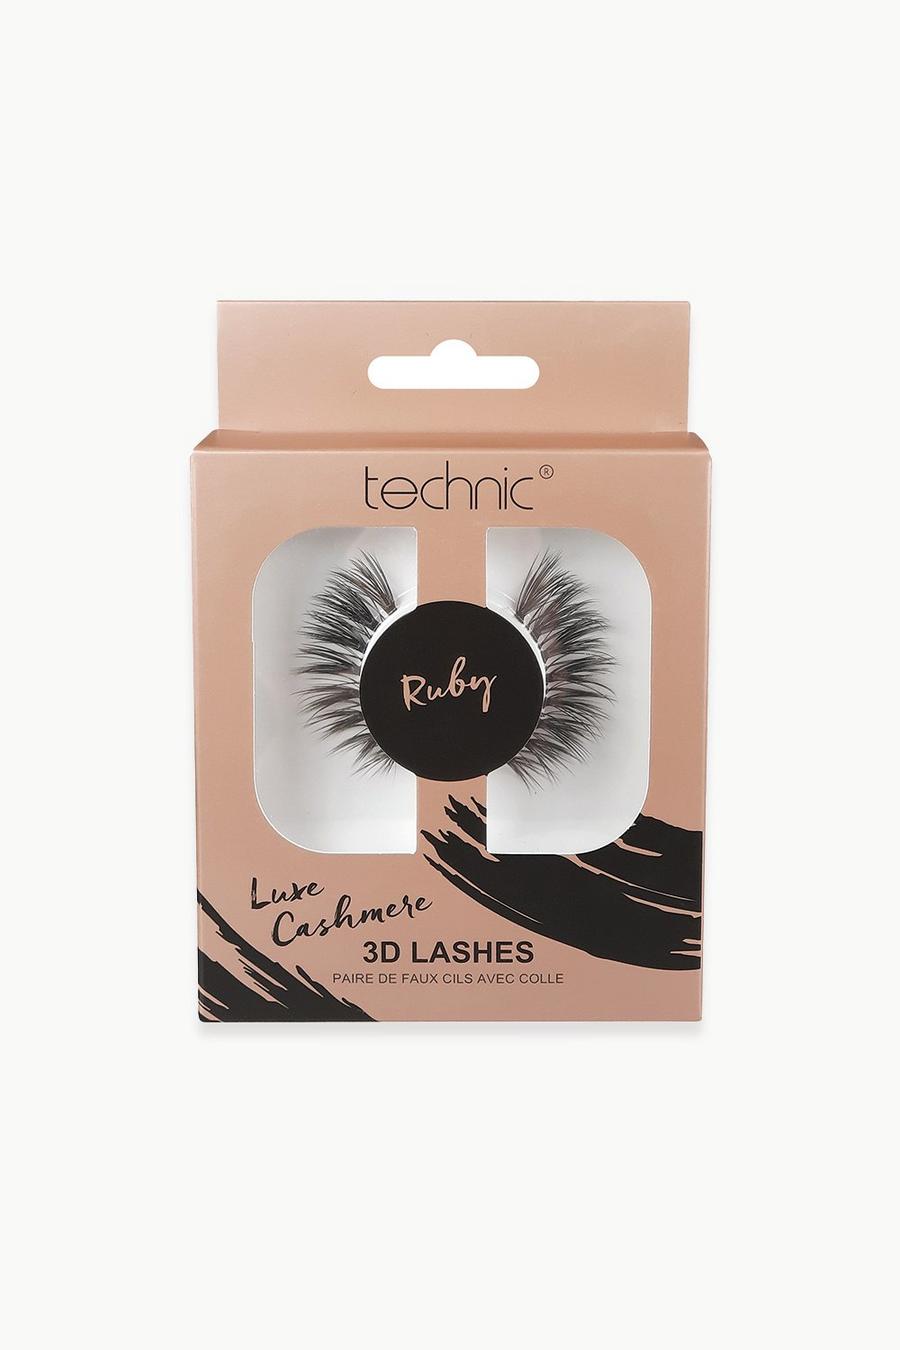 Technic Luxe Cashmere Wimpern - Ruby, Black